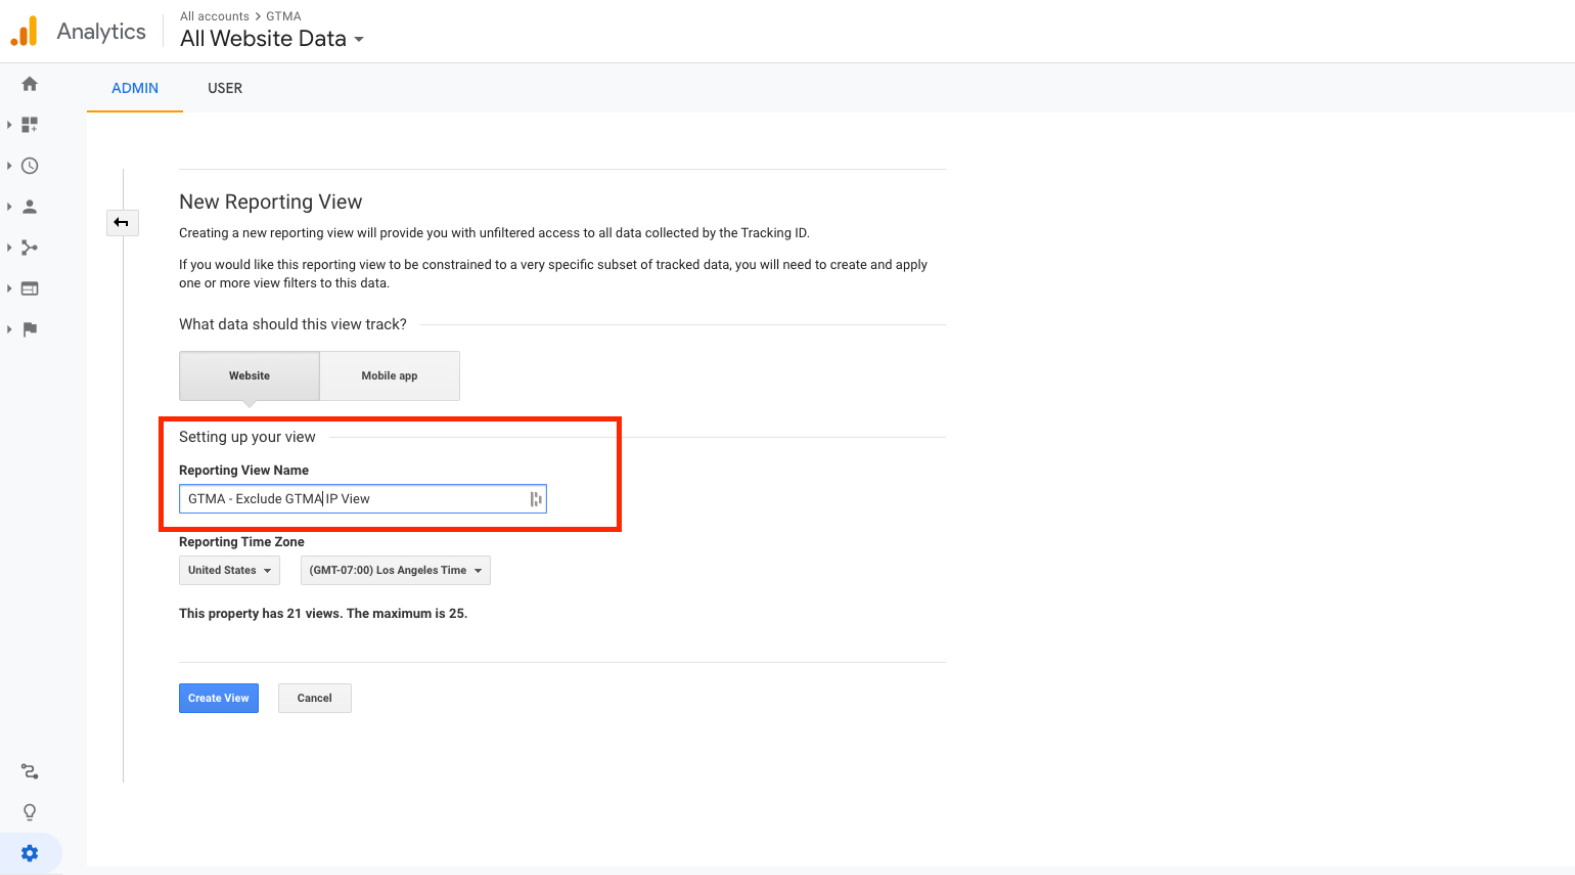 Screenshot of setting up a reporting view excluding IP address in Google Analytics